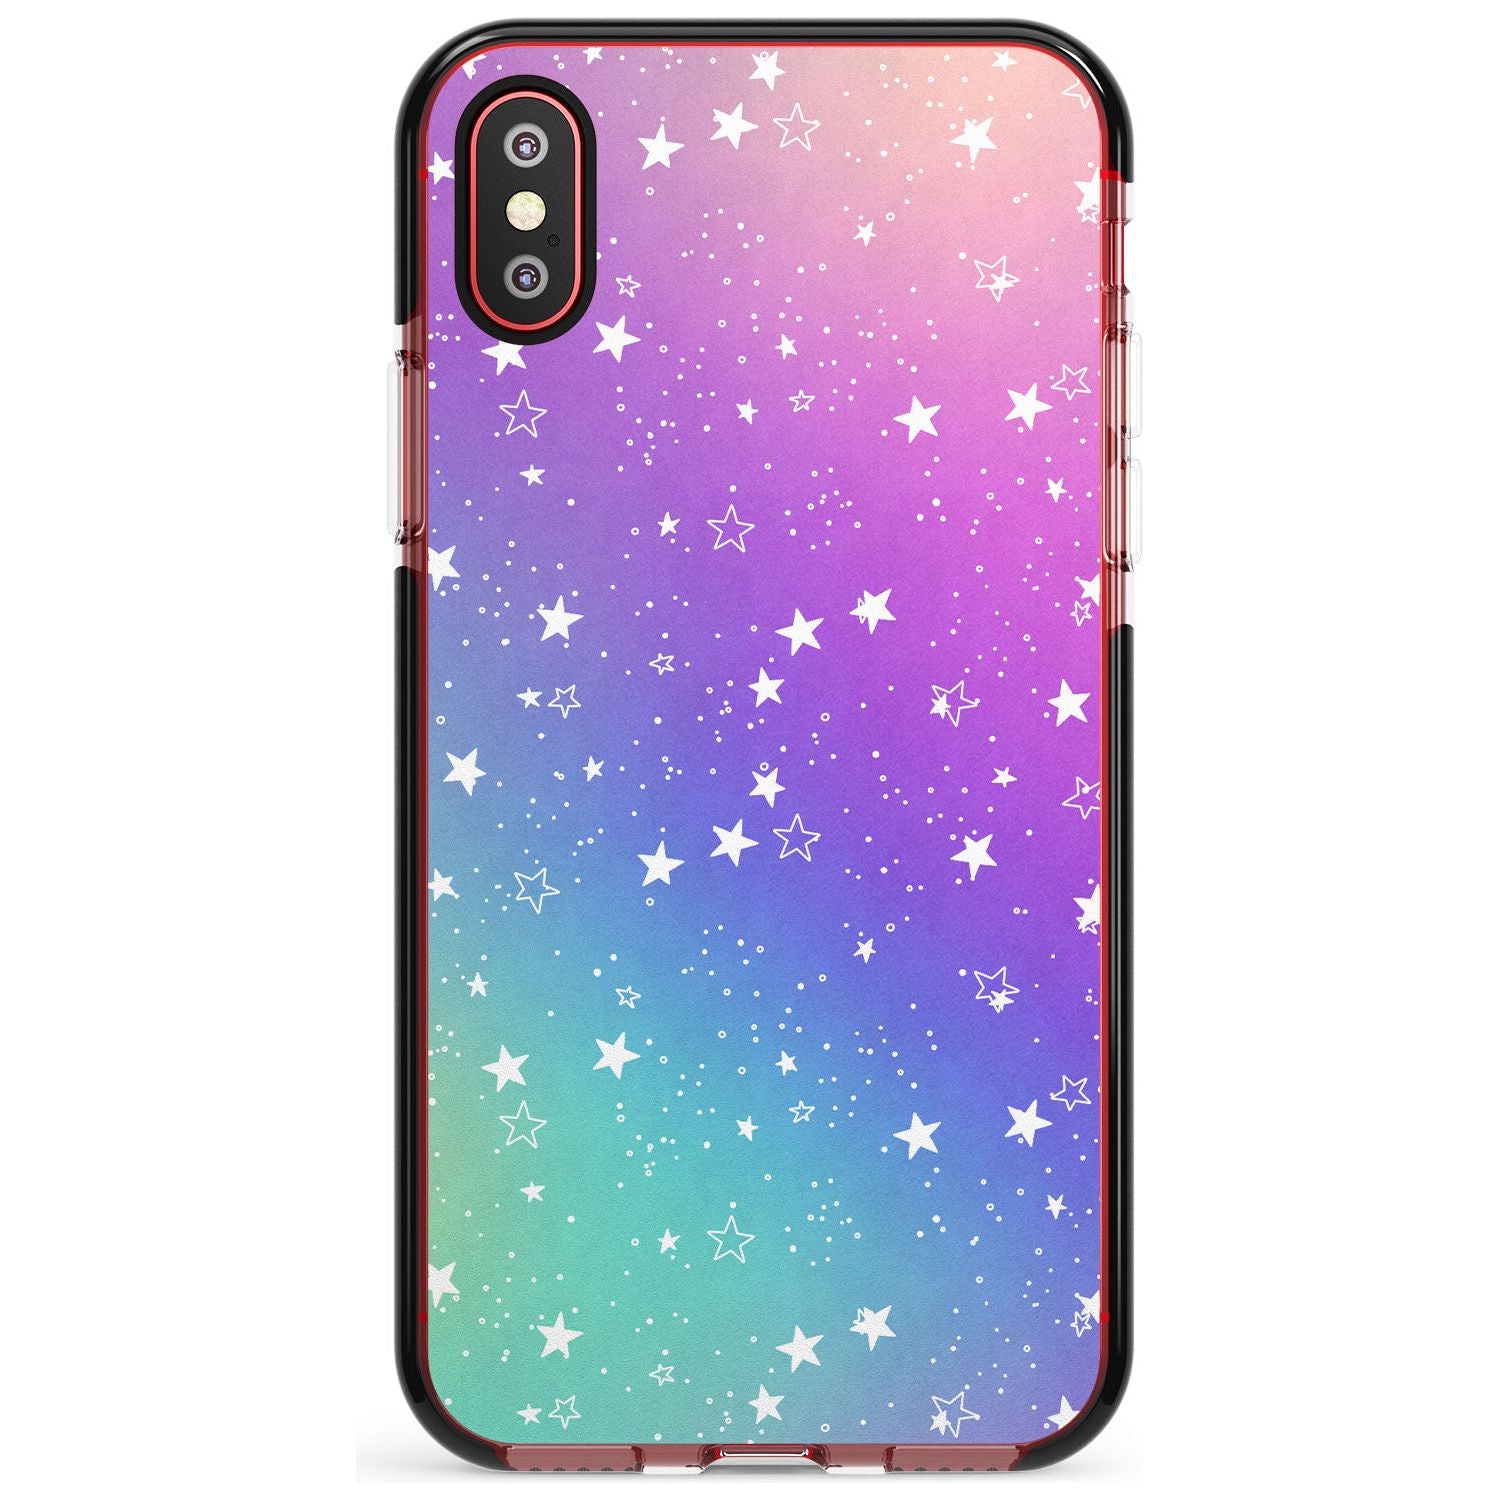 White Stars on Pastels Pink Fade Impact Phone Case for iPhone X XS Max XR